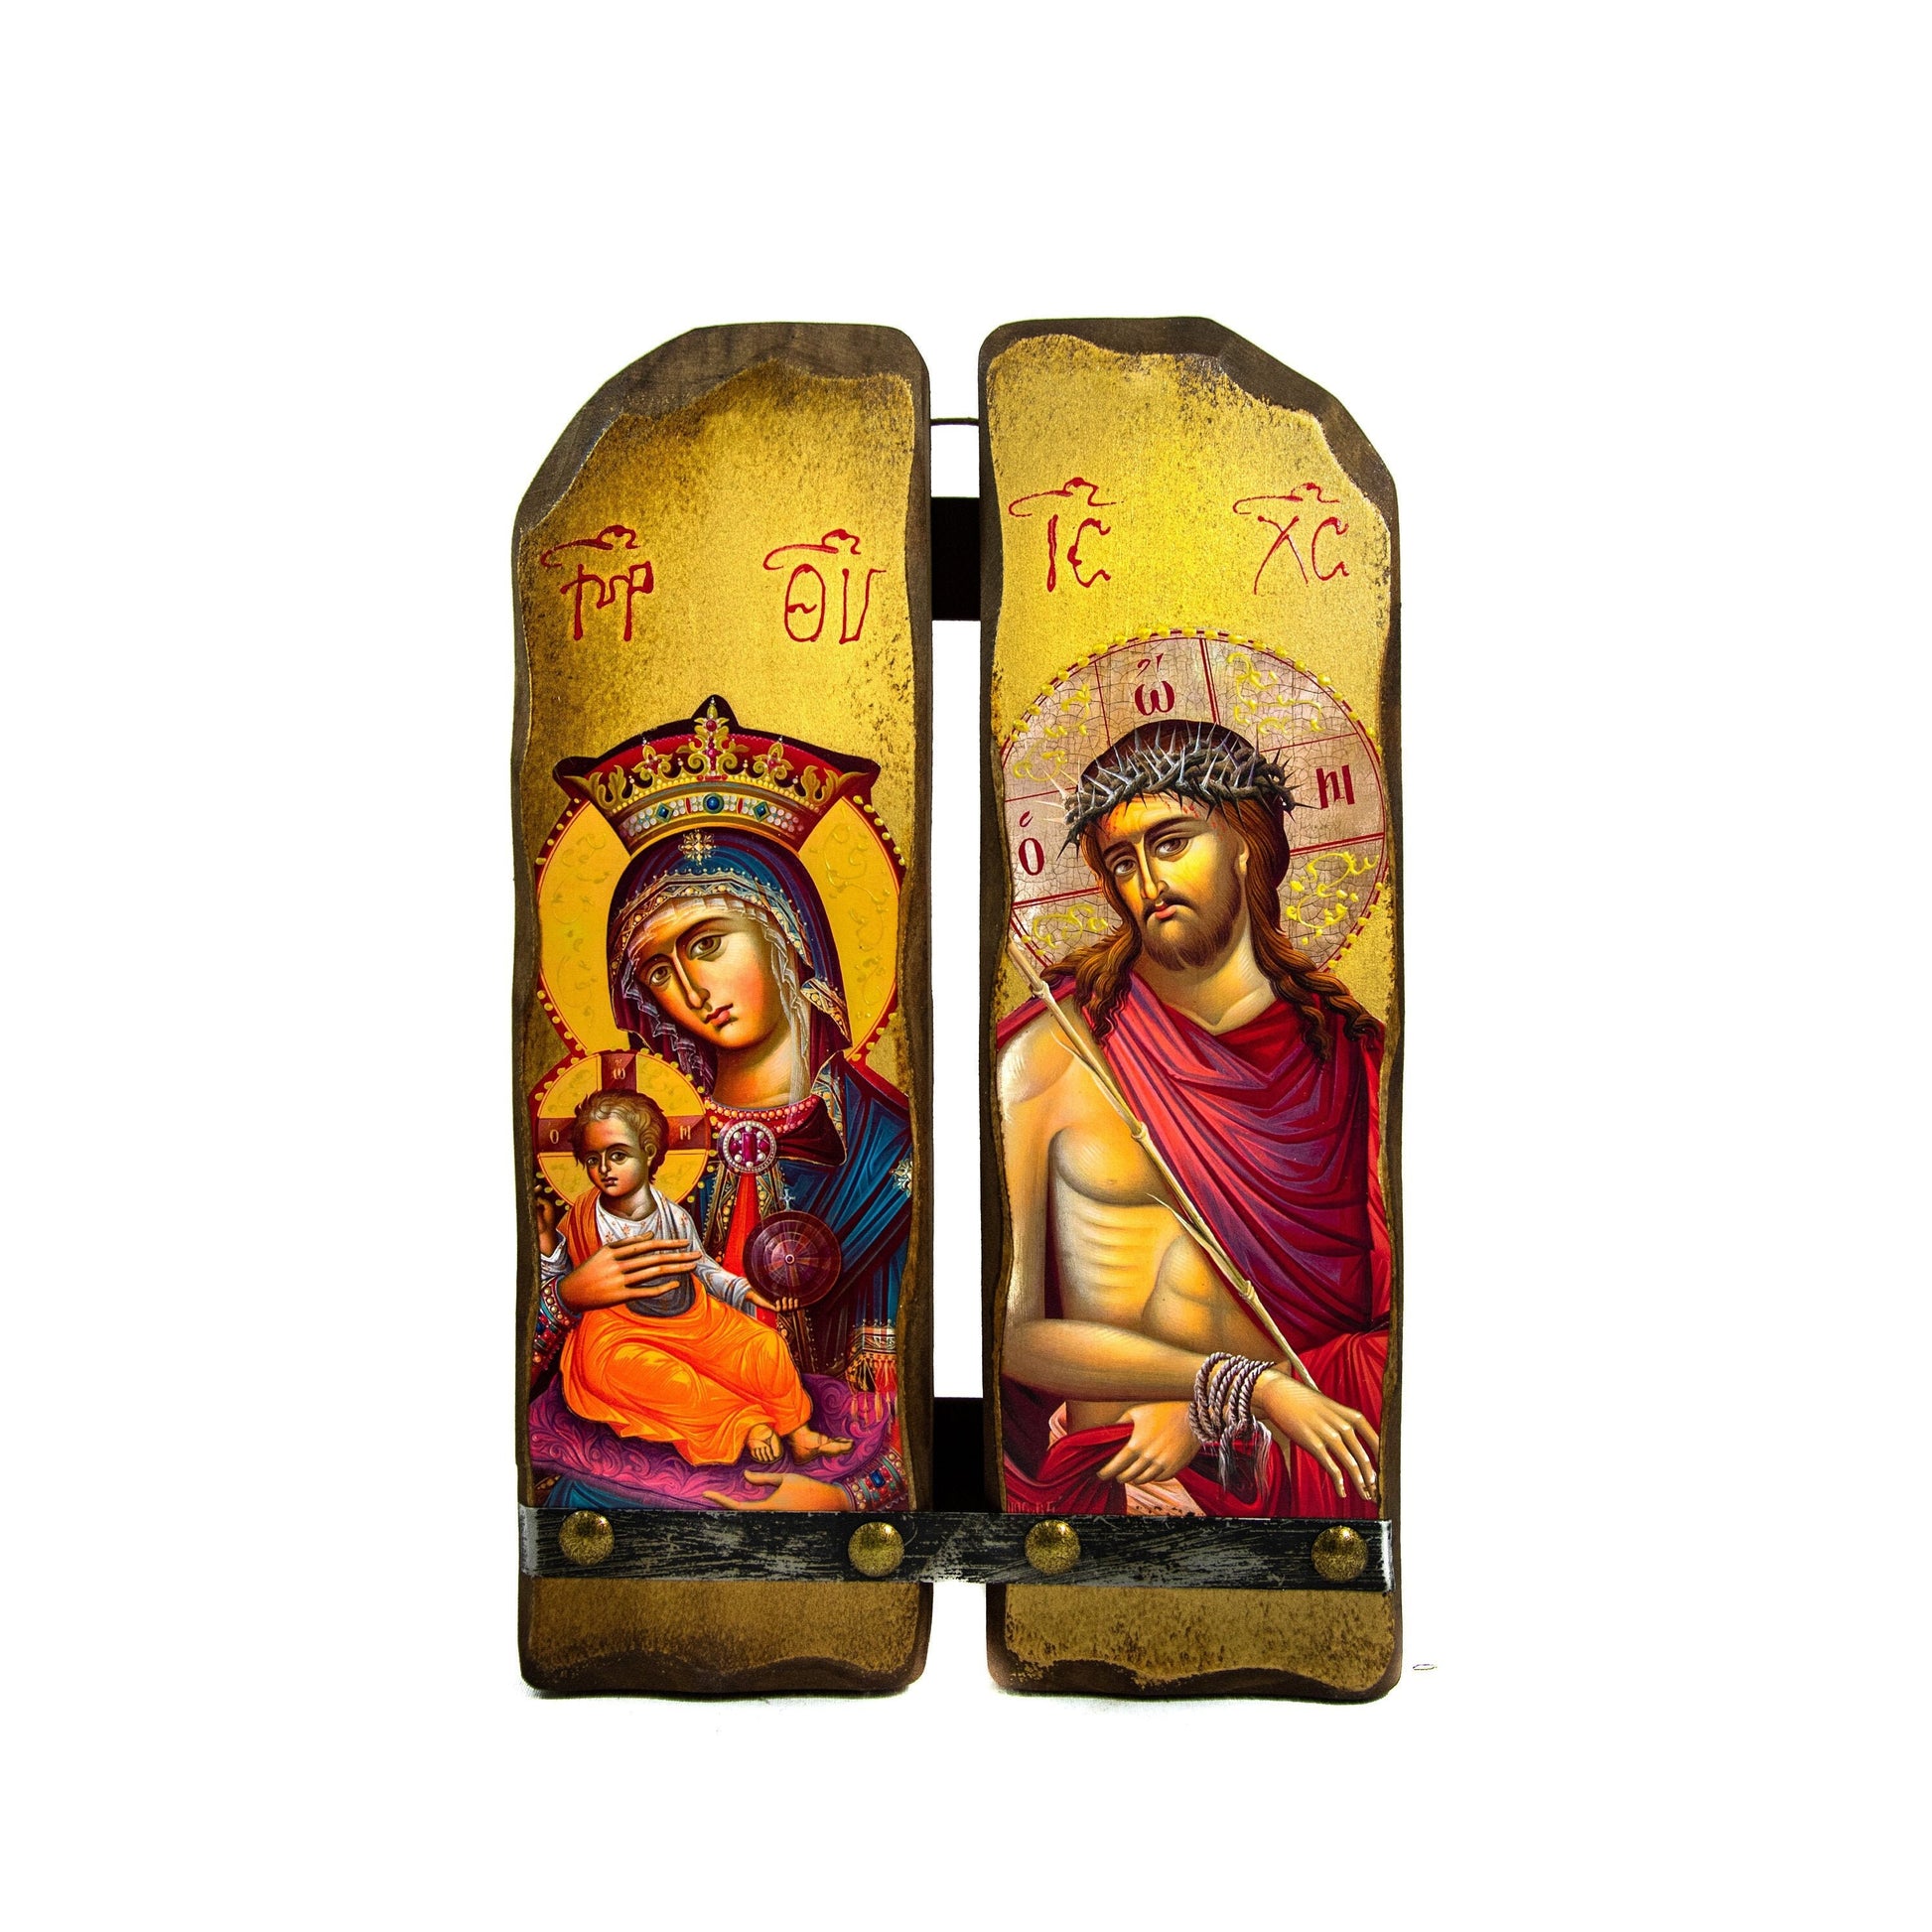 Virgin Mary & Jesus Christ icon , Handmade Greek Orthodox Icon, Mother of God and our Lord Byzantine art wall hanging wood plaque, decor TheHolyArt